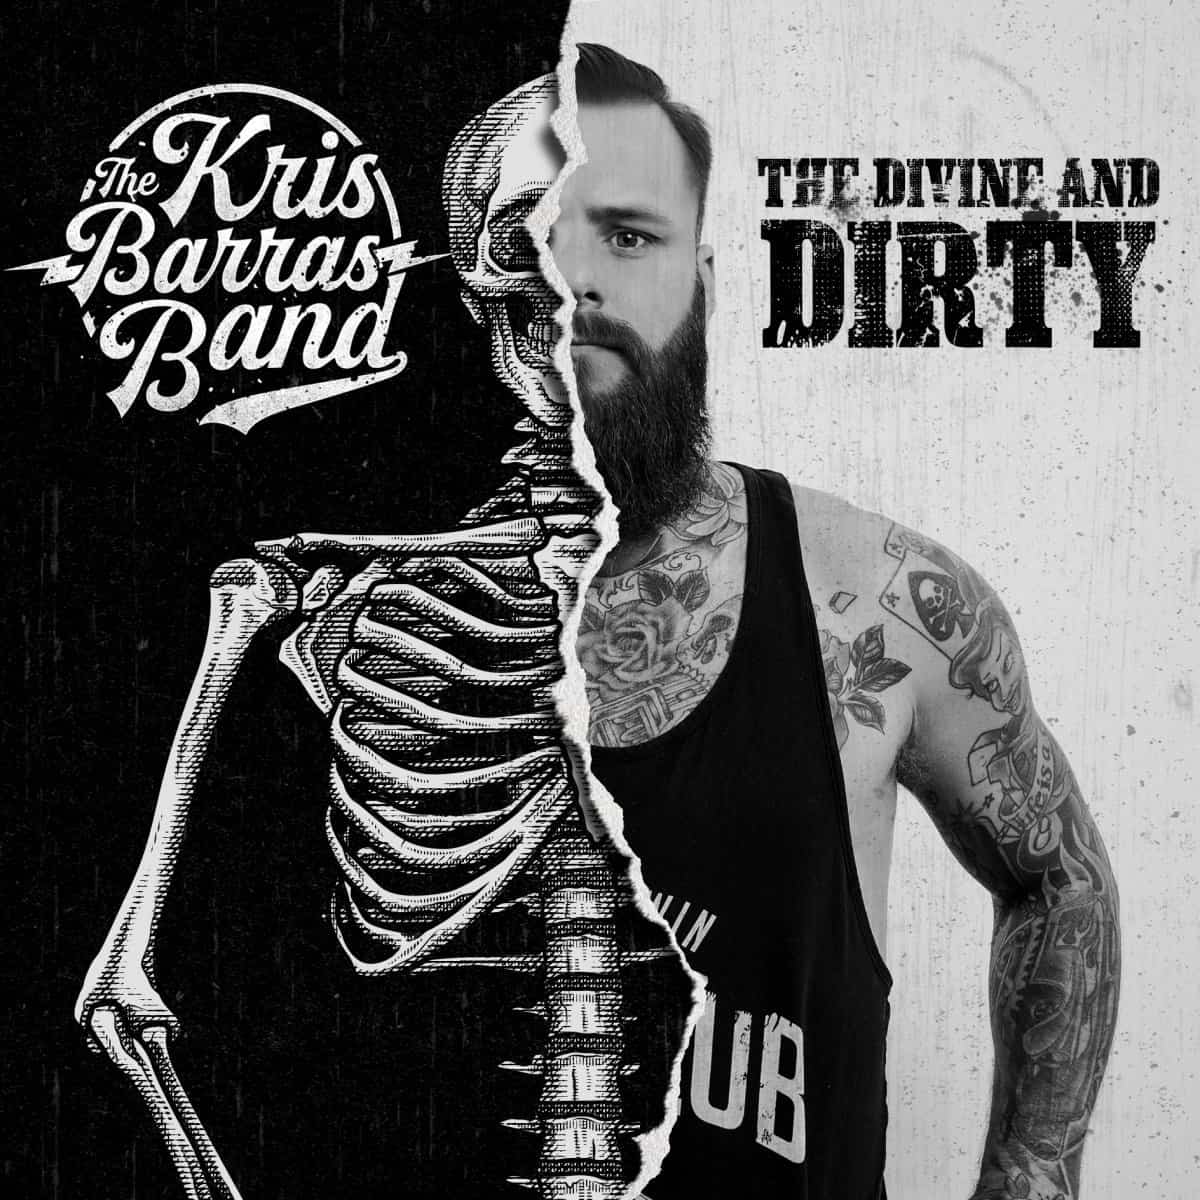 KRIS BARRAS BAND – The Divine and The Dirty